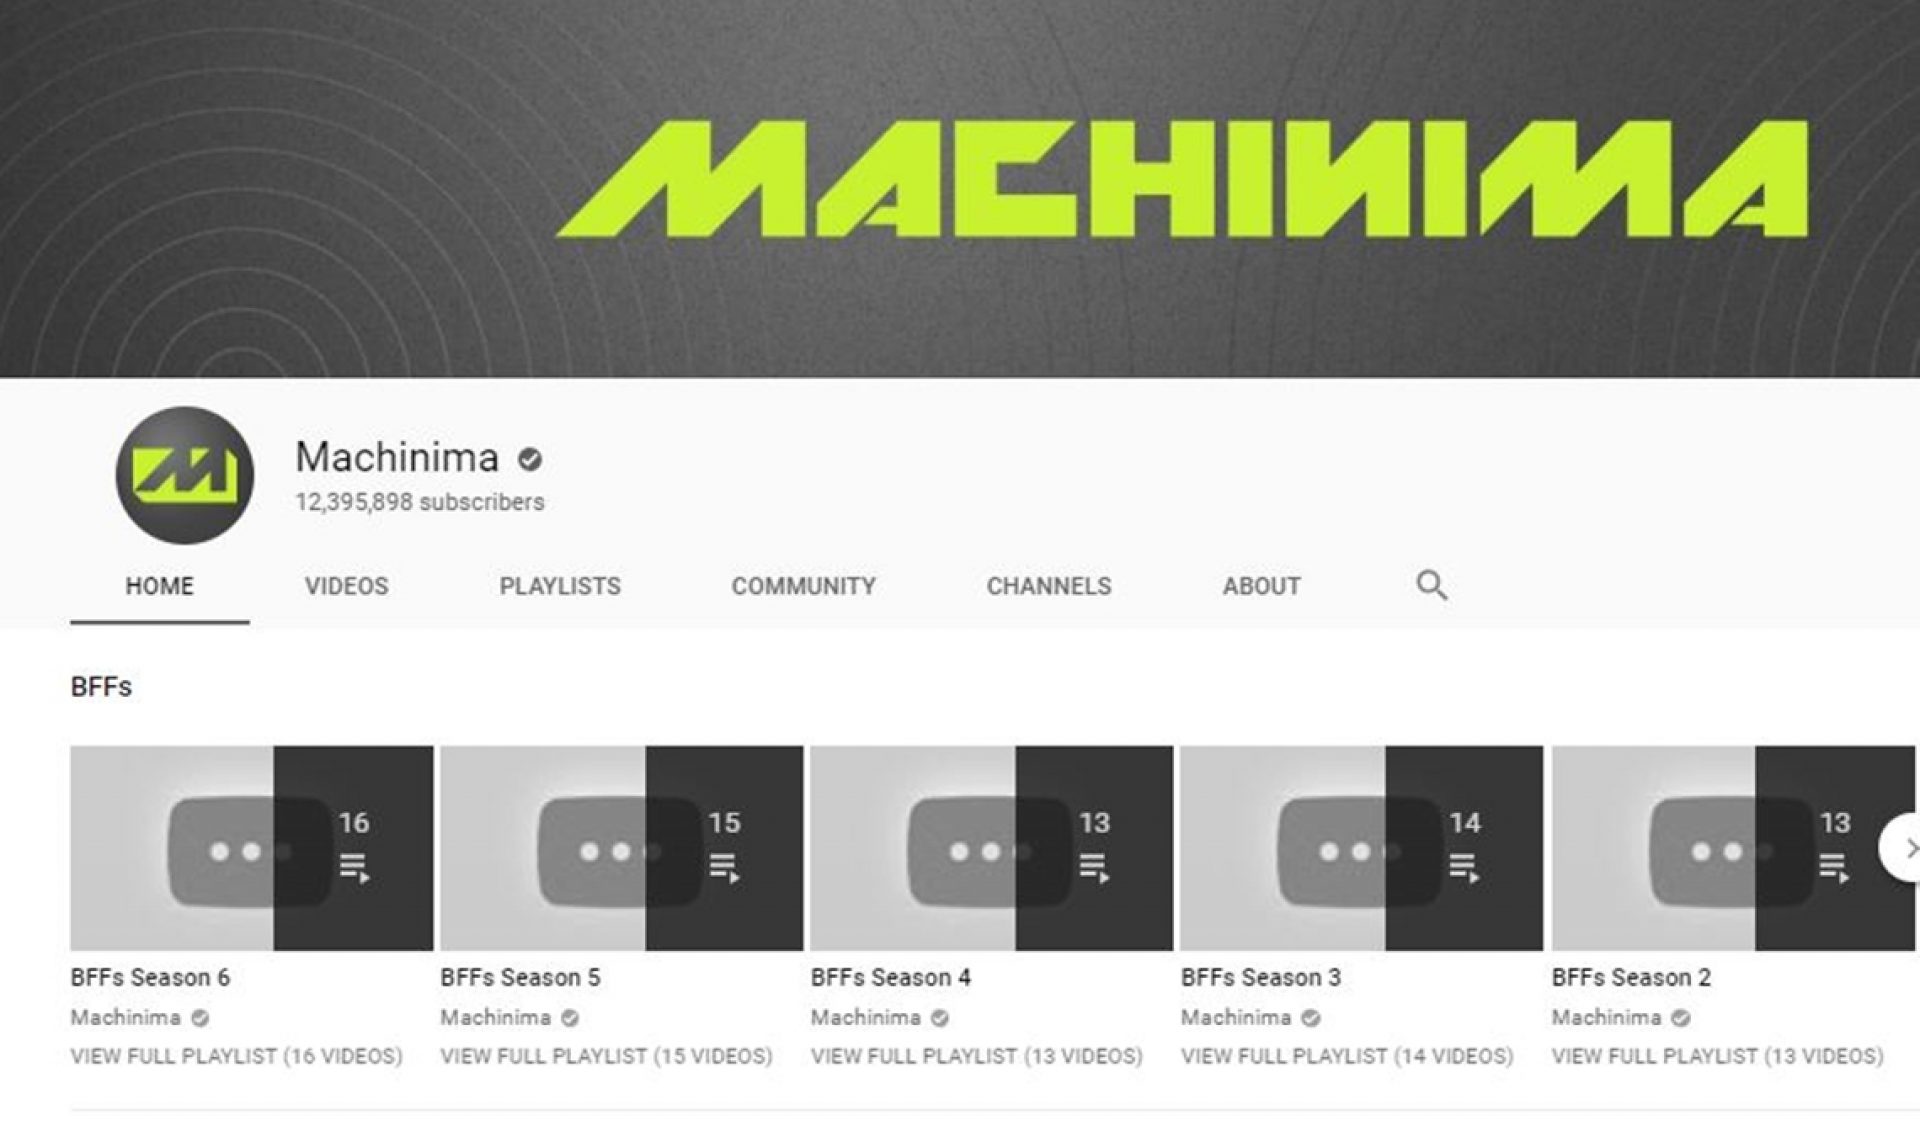 After Porting Its Creator Network To Fullscreen, Machinima Wipes